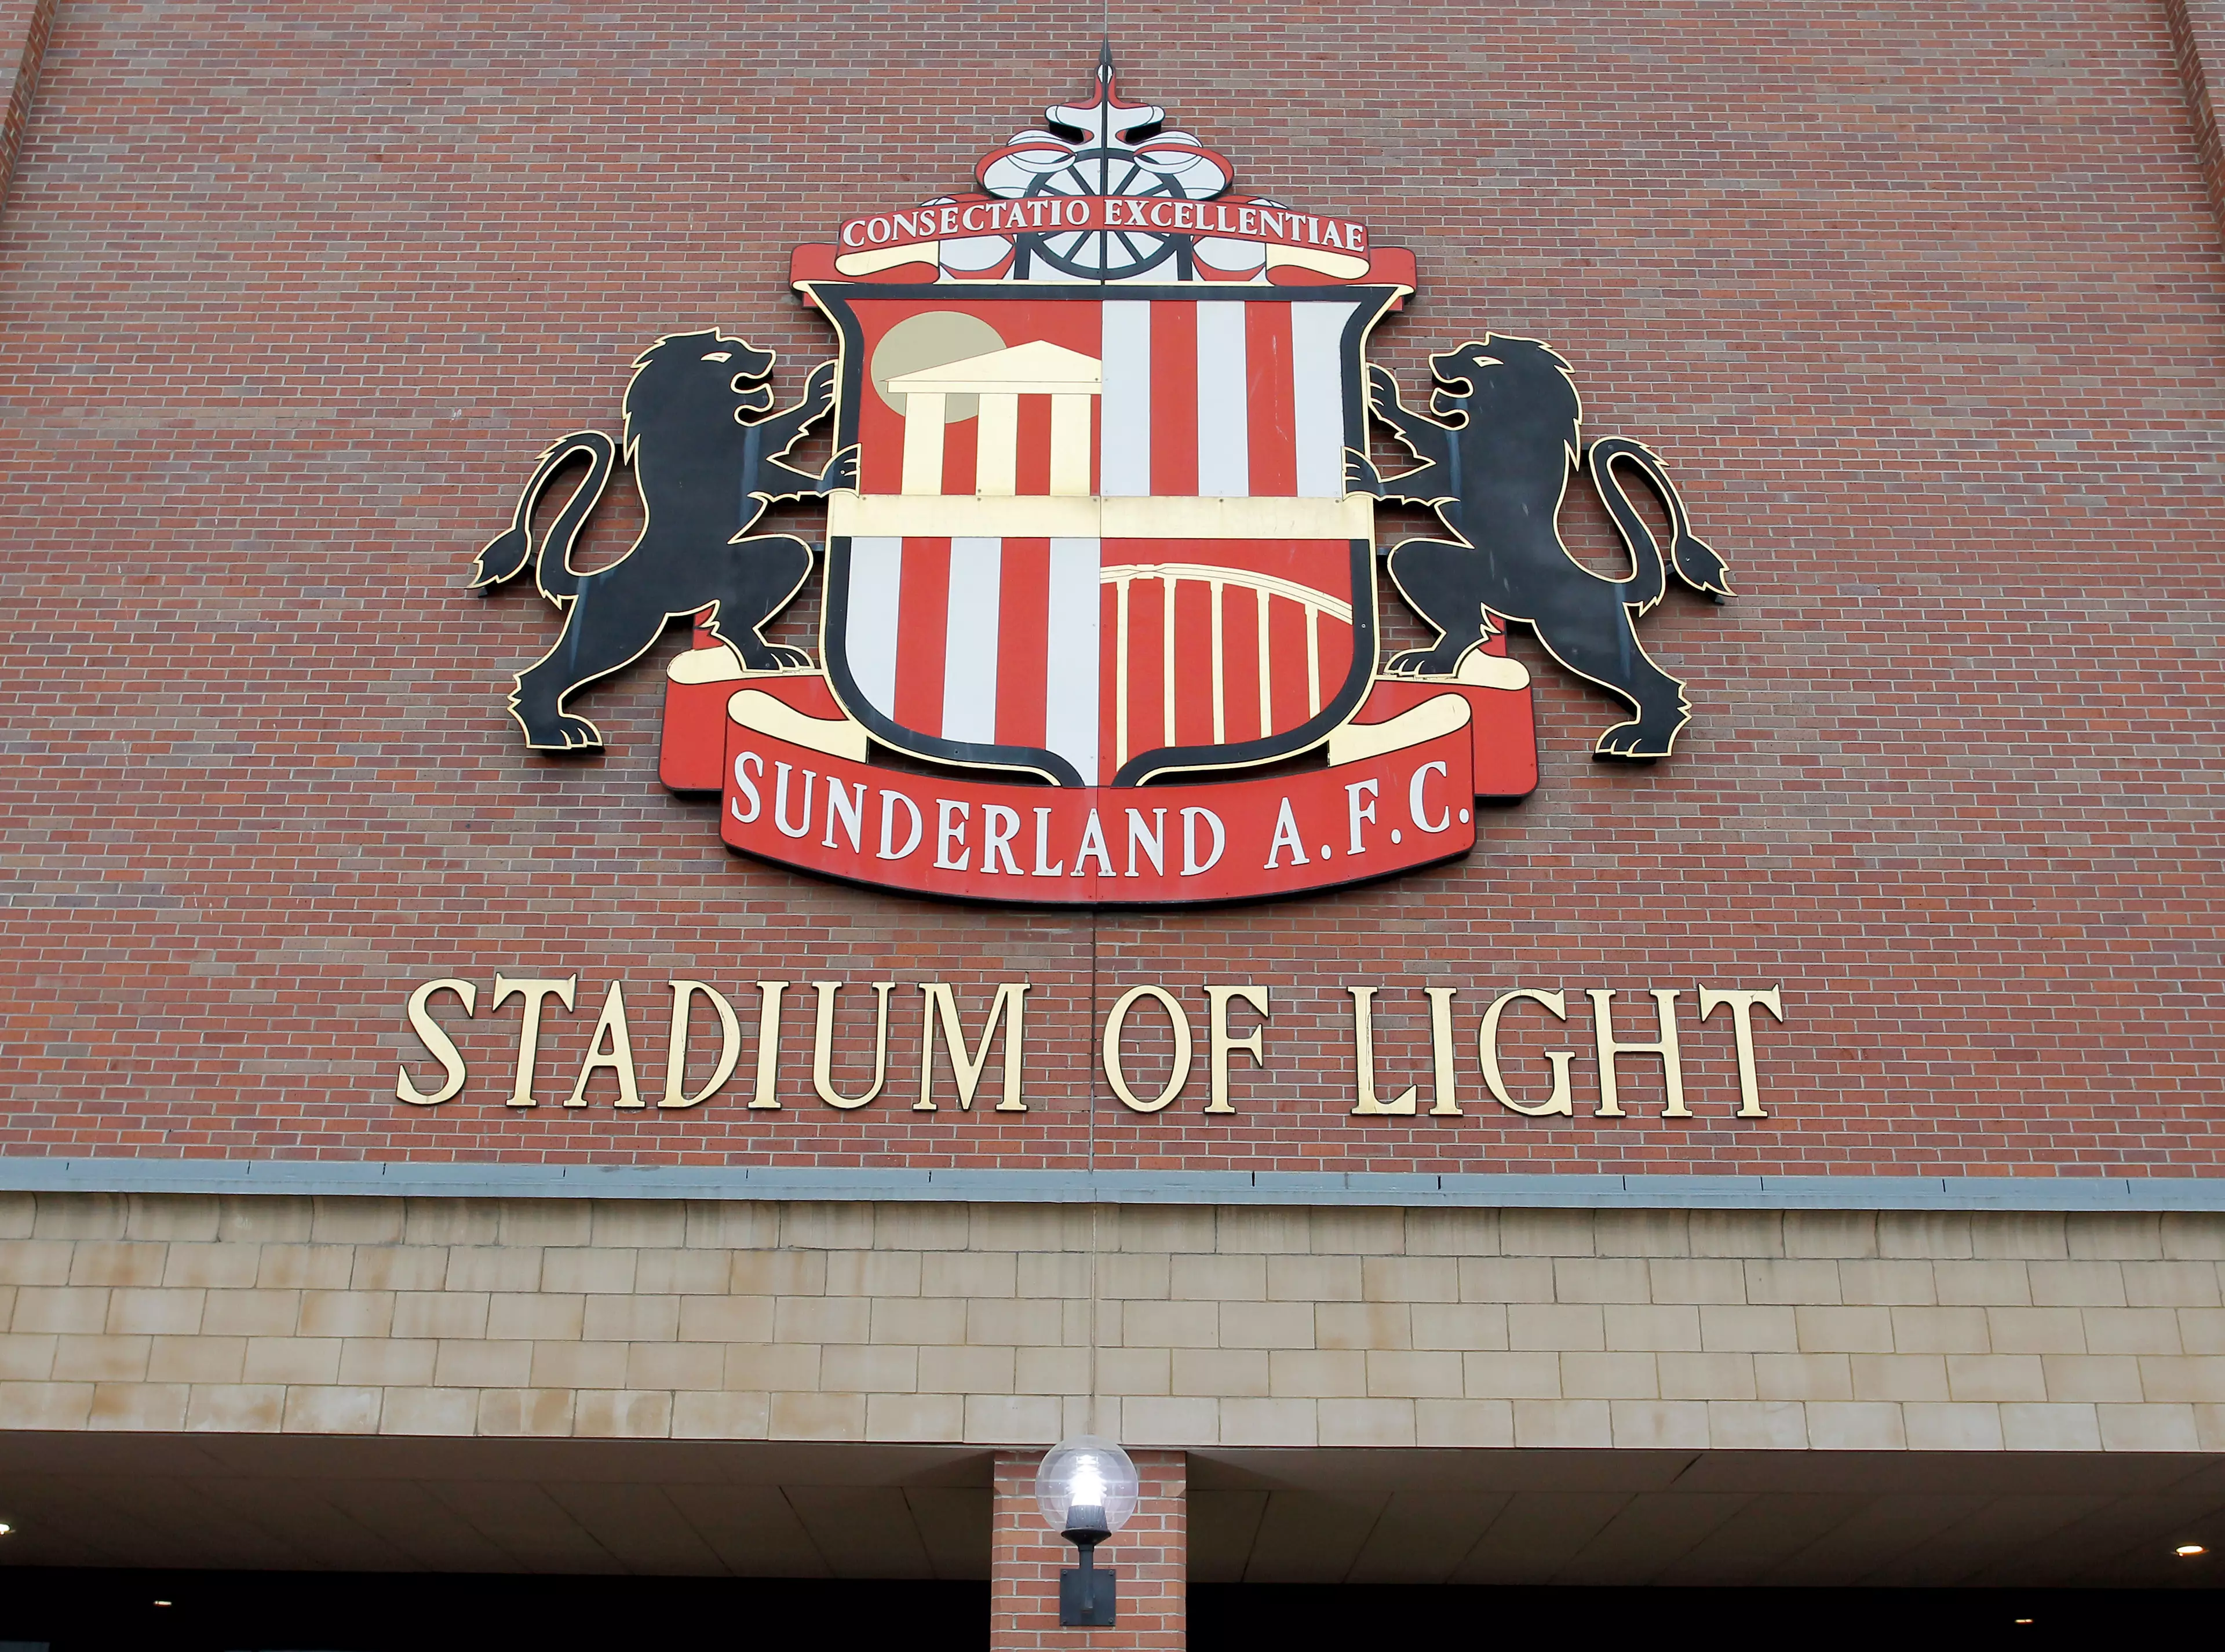 Player Agrees To Sign For Sunderland, Then Decides He Doesn't Want To Join Them